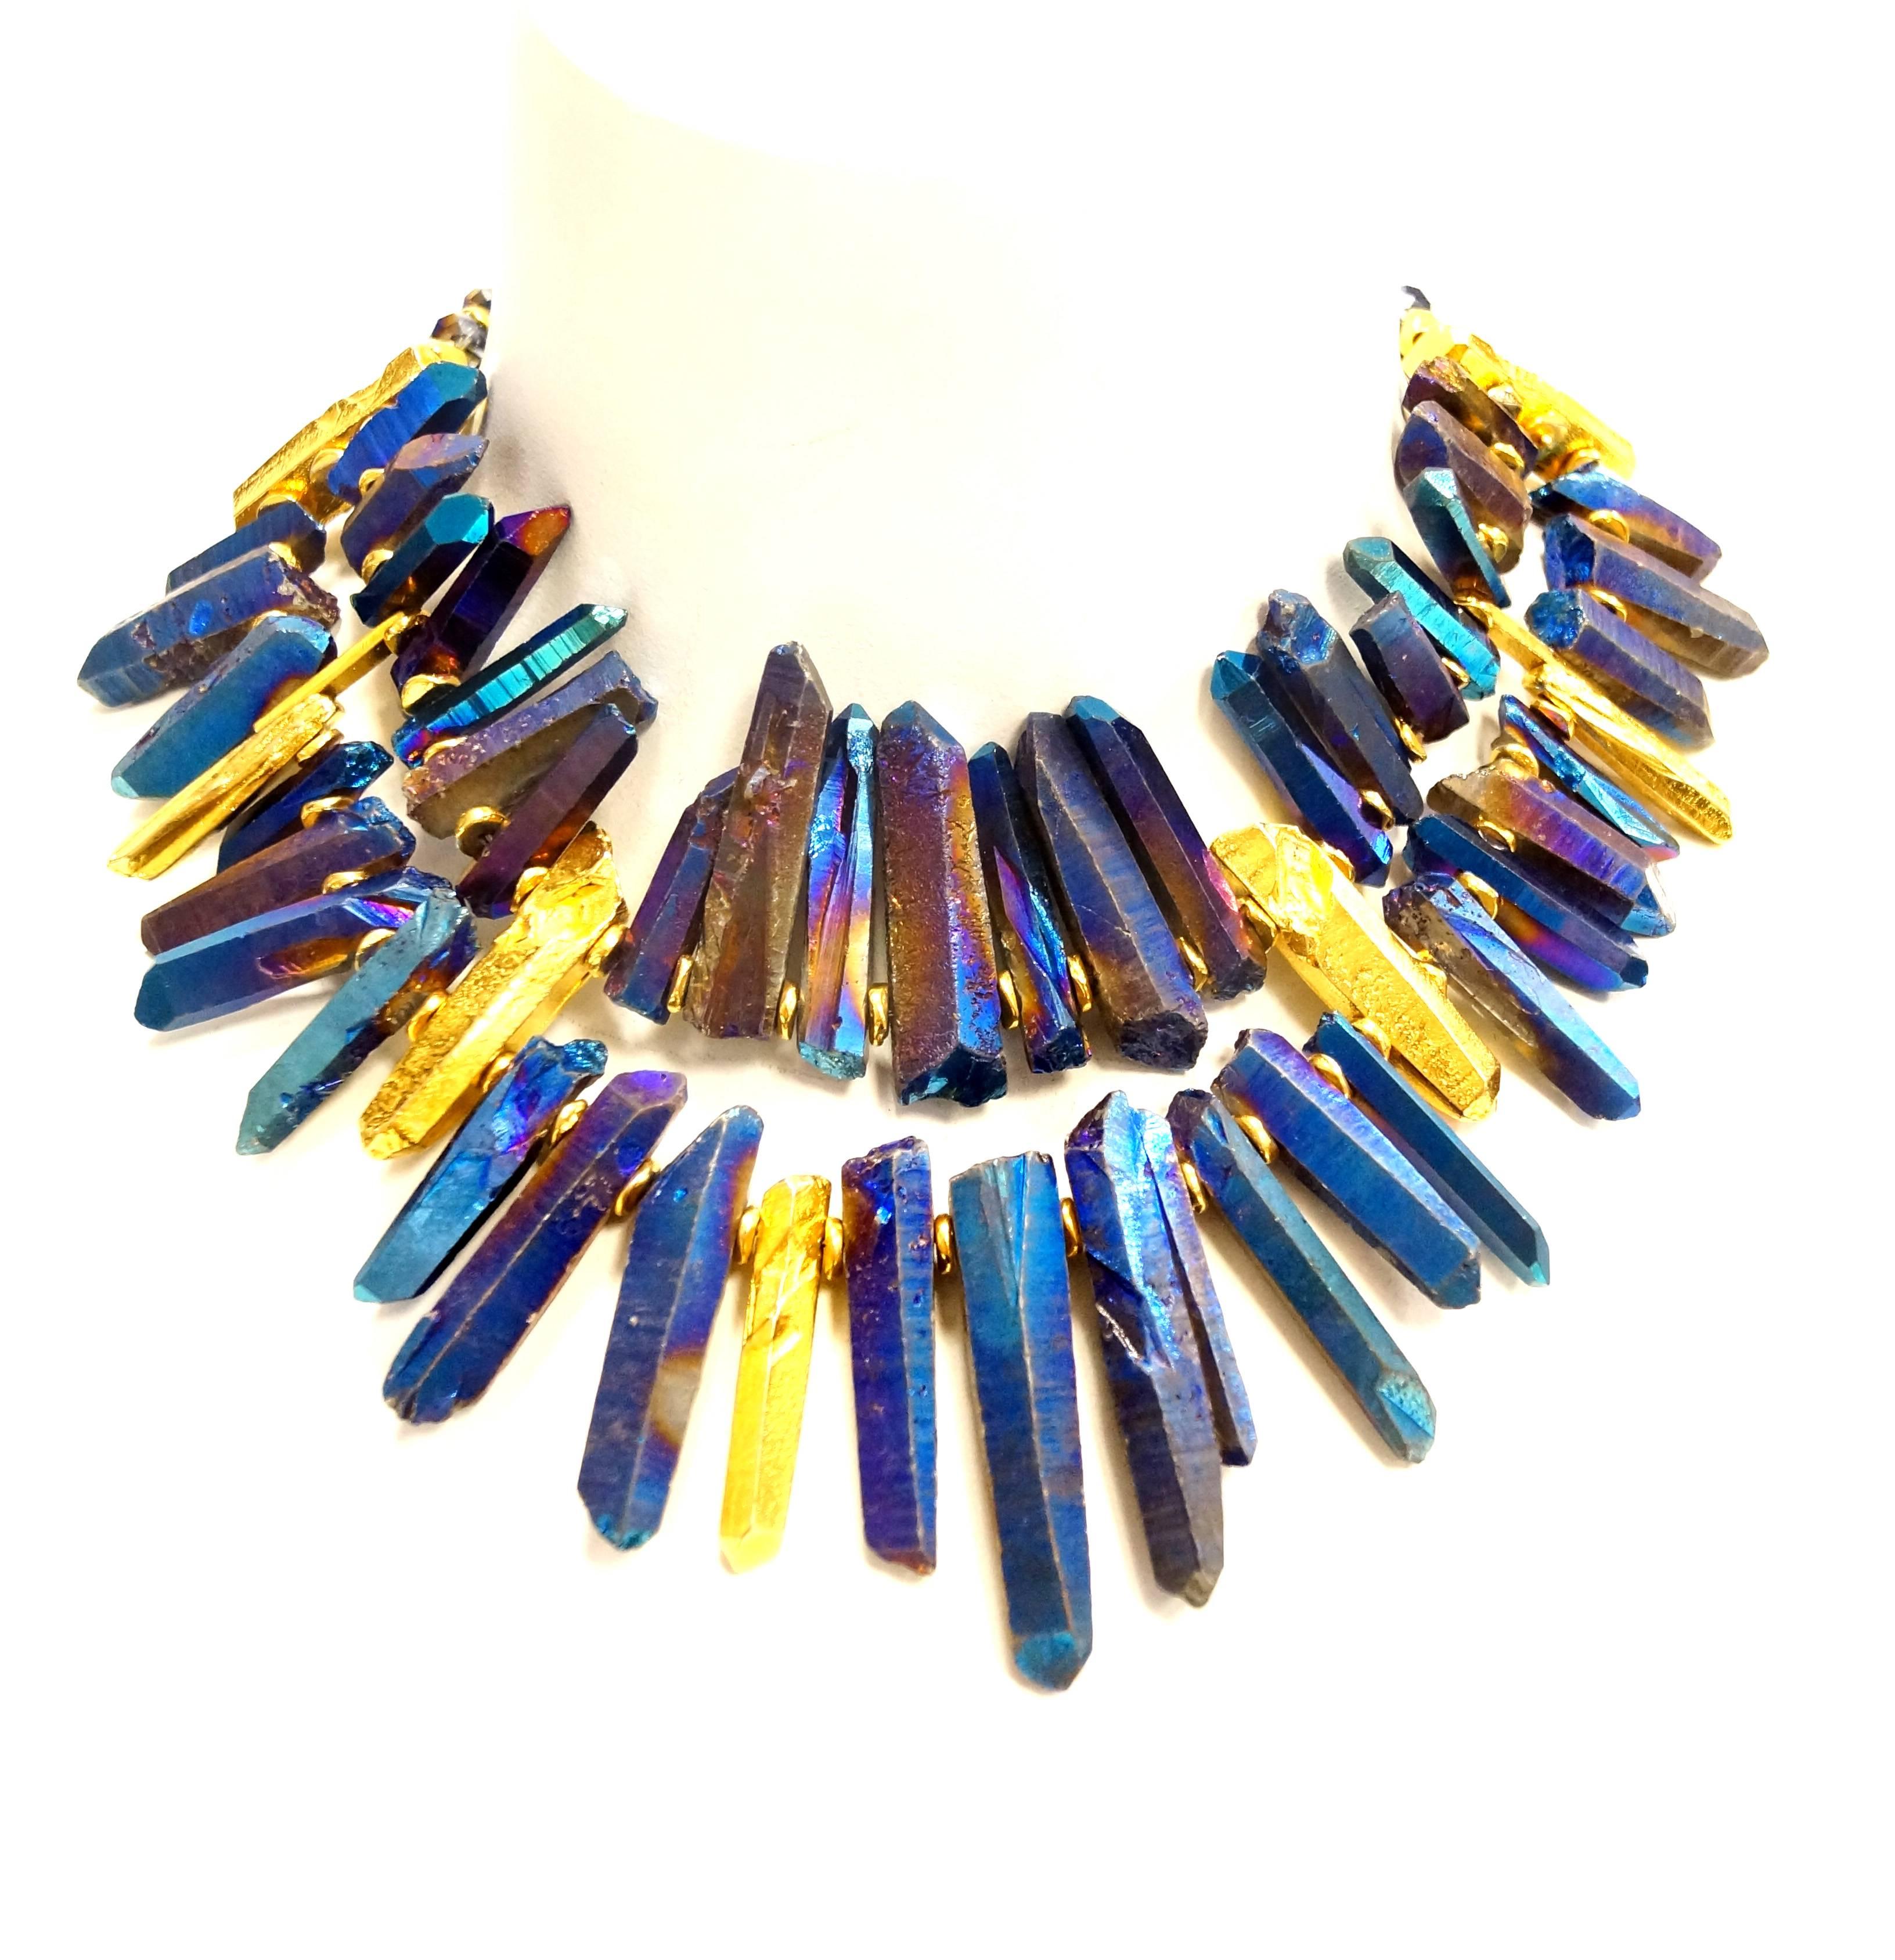 This gold and blue iridescent crystal necklace is an absolute dream! The Barrera necklace is composed of a triple strand of iridescent blue multifaceted spherical beads with gold - tone bar spacers. The triple strands give way to two strands of what